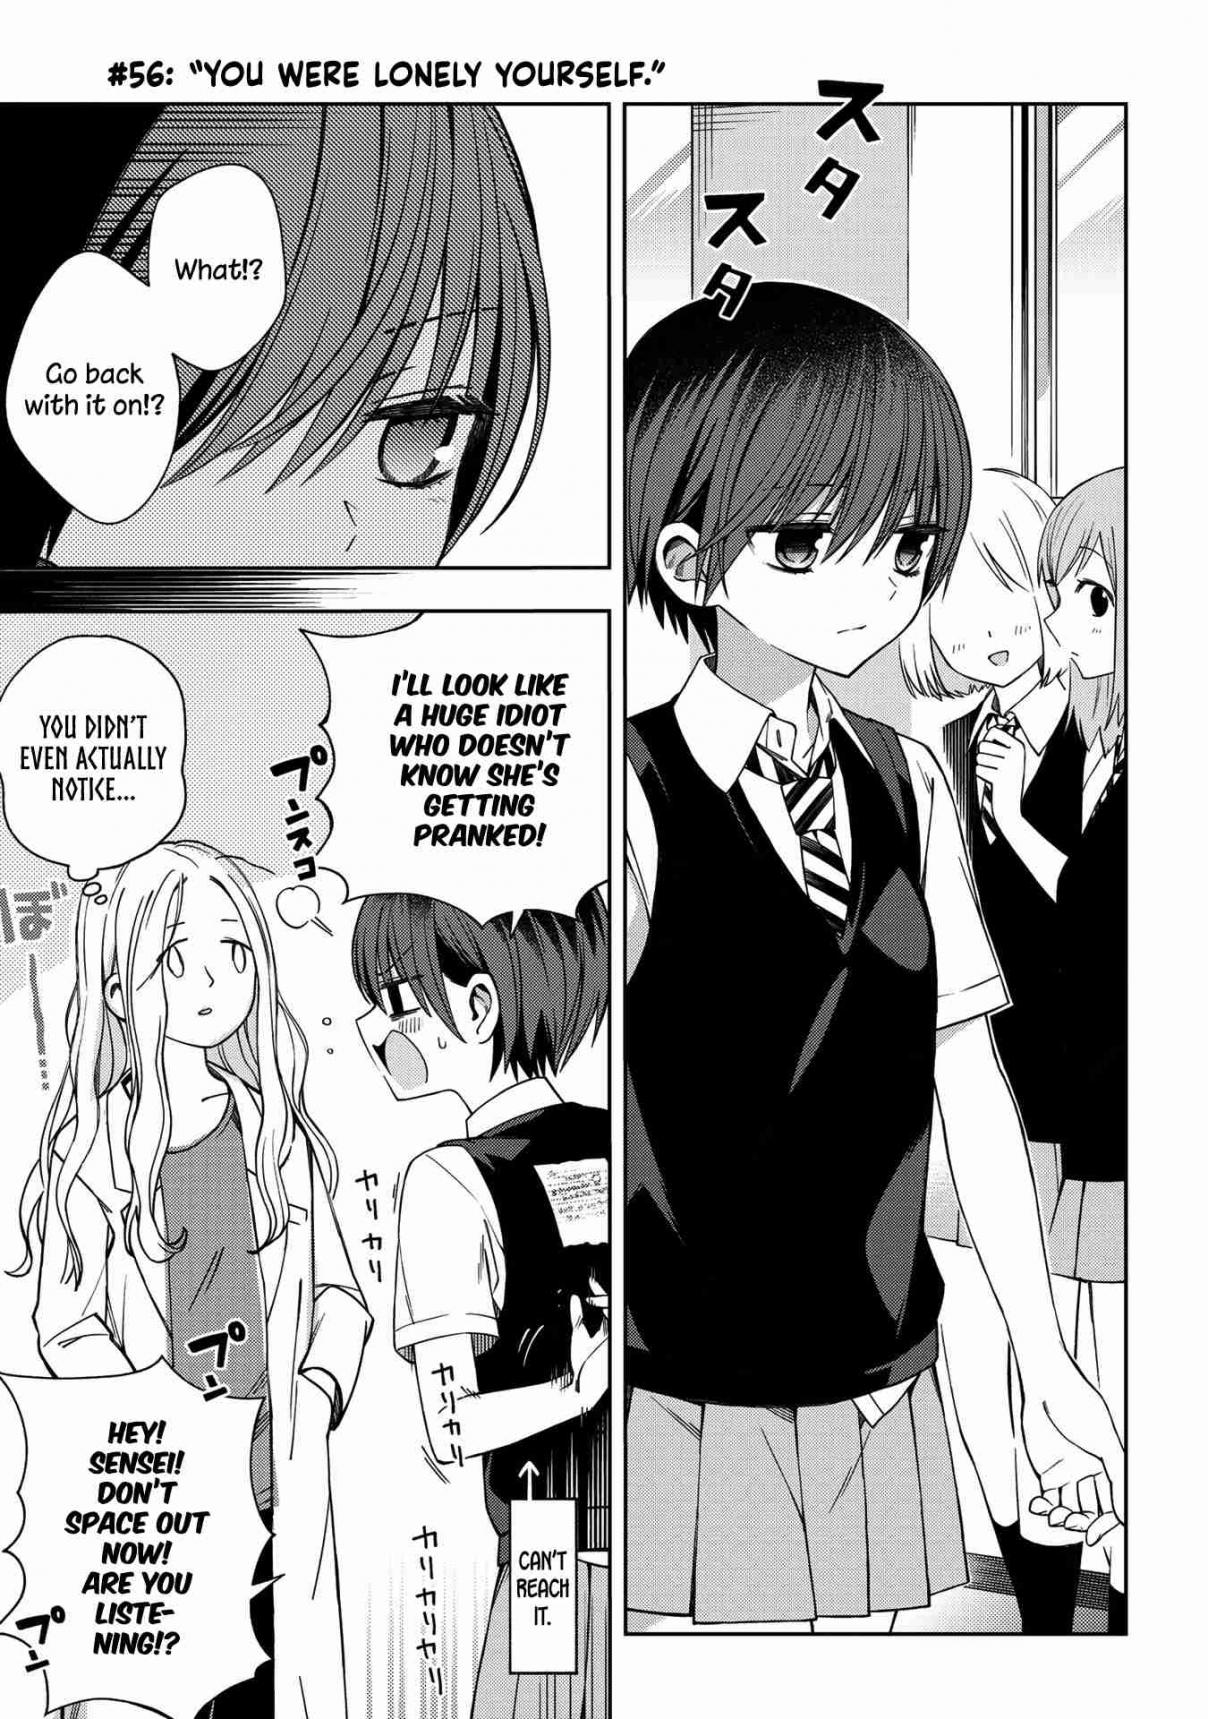 School Zone Vol. 3 Ch. 56 You were lonely yourself.